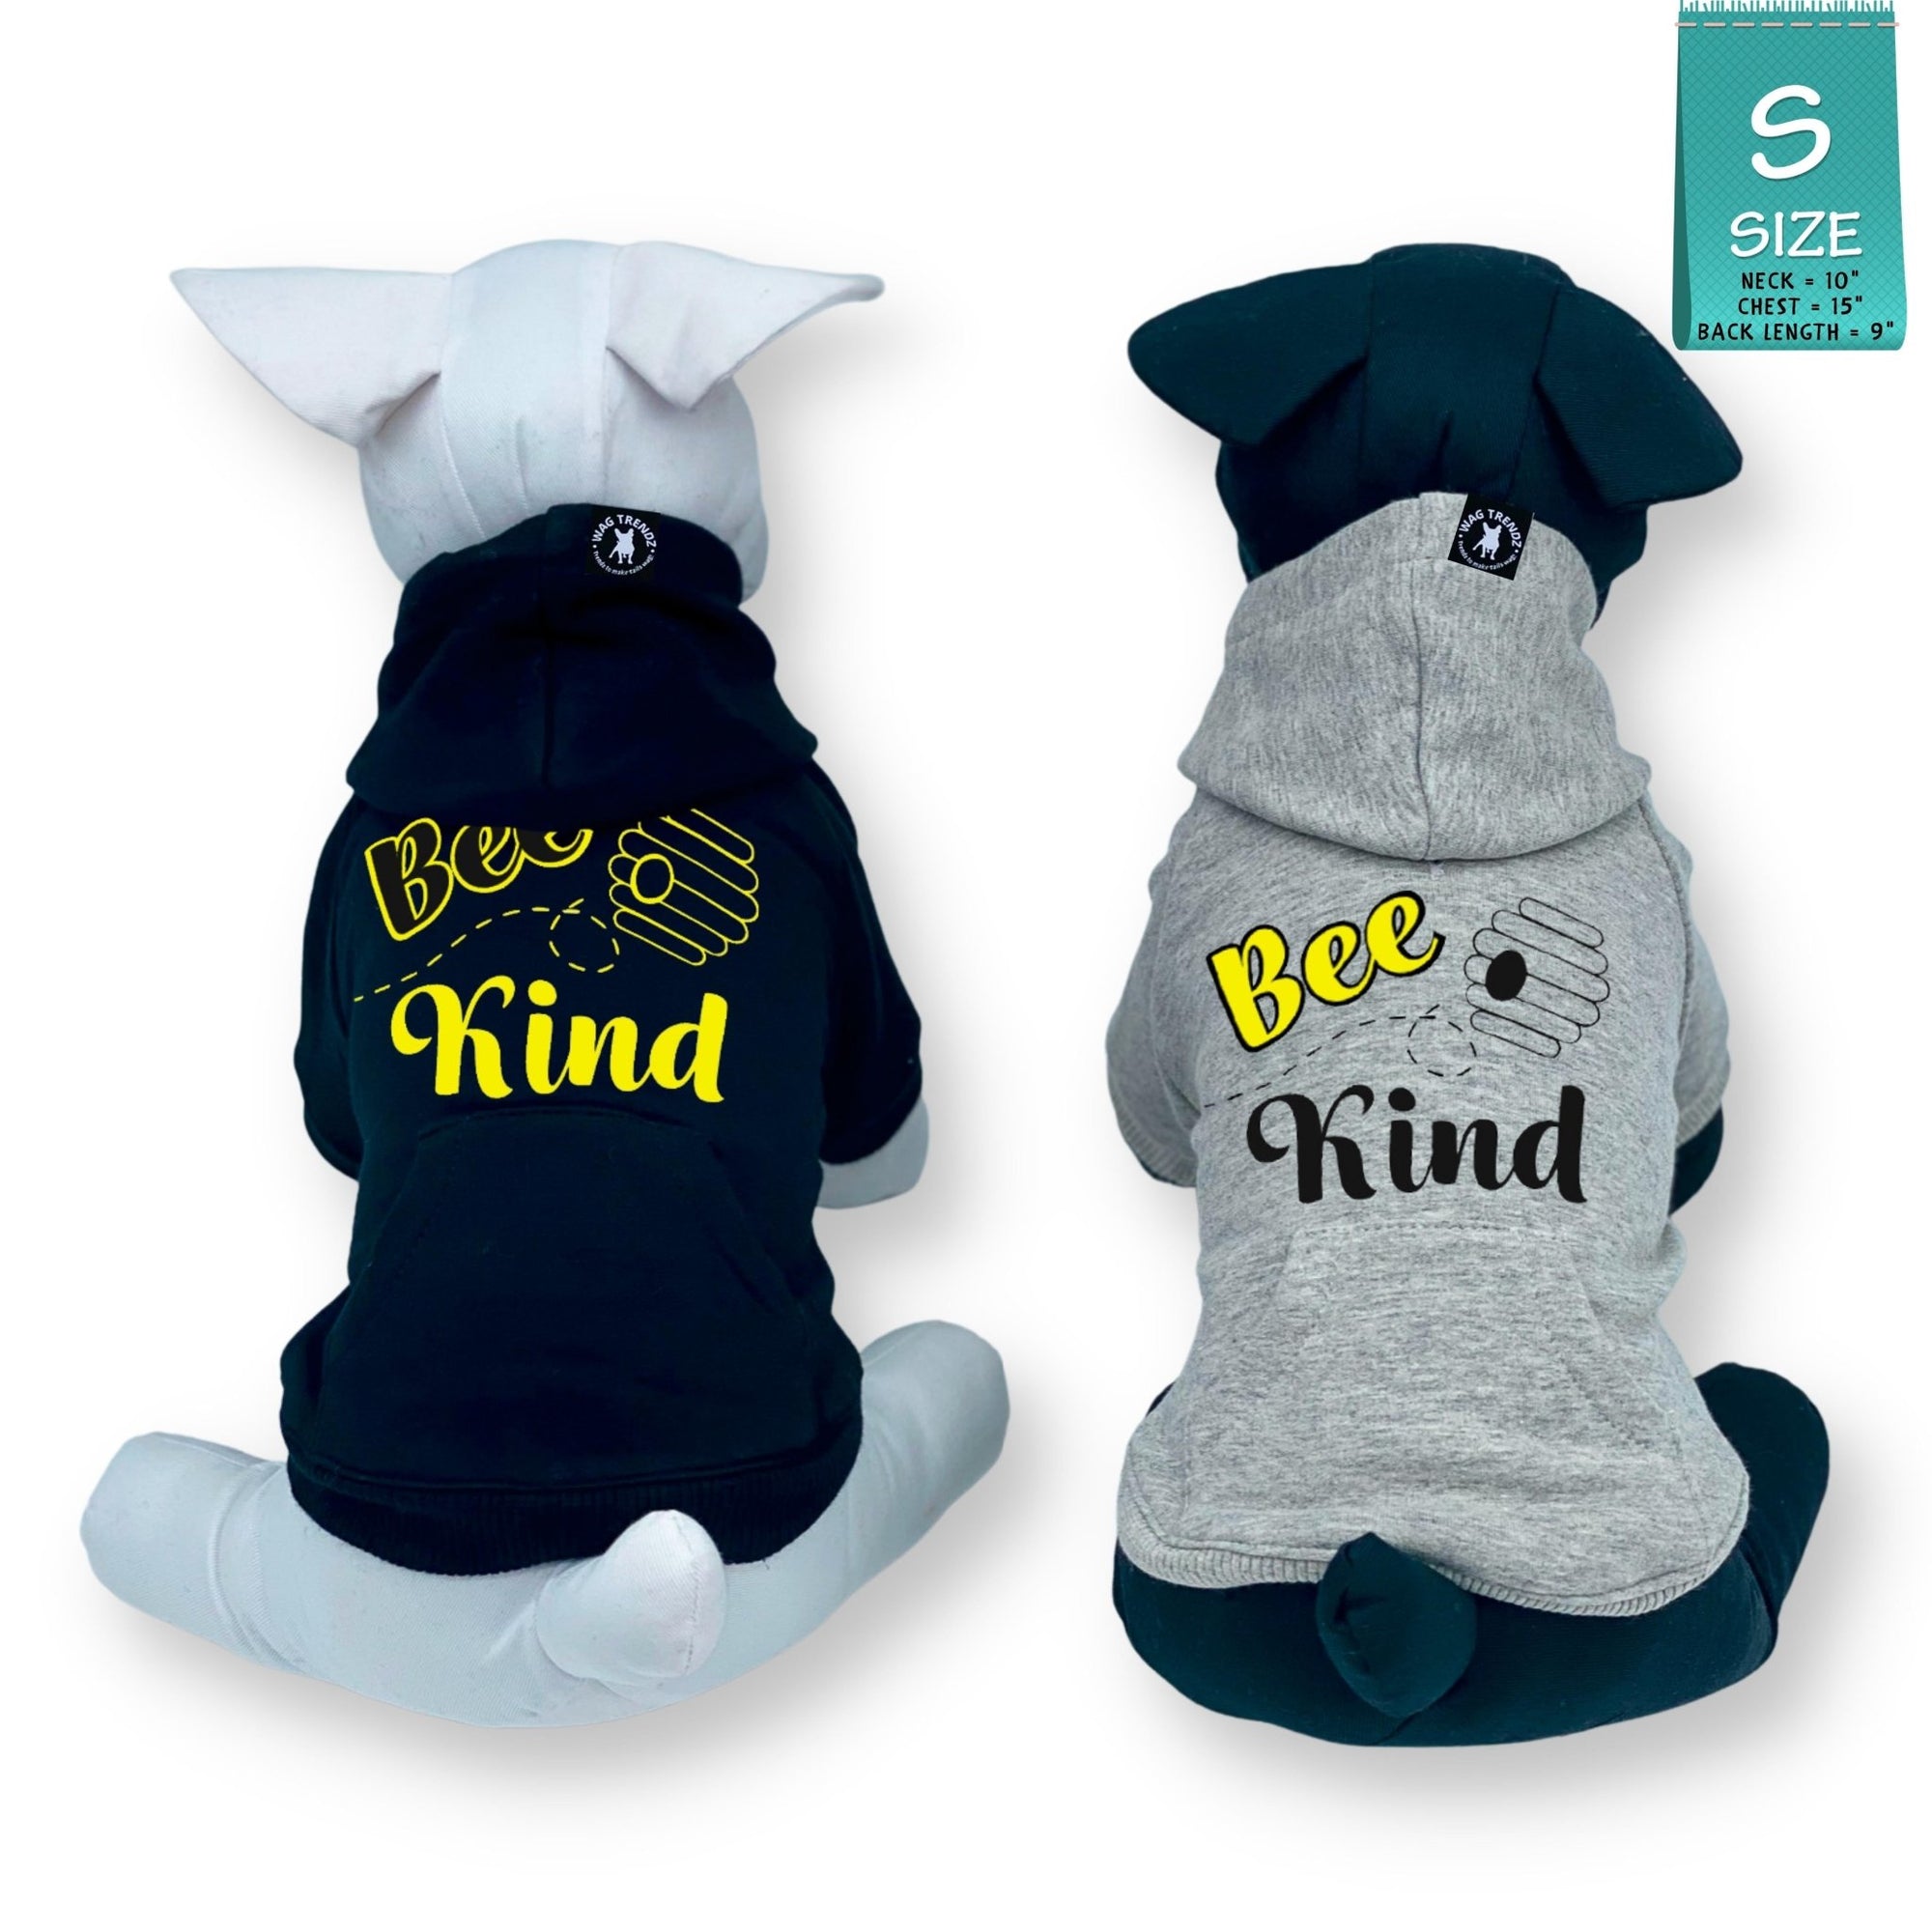 Dog Hoodie - Hoodies For Dogs - Two stuffed dogs one black one white wearing &quot;Bee Kind&quot; dog hoodies in gray and black - Bee Kind and hive on back - against solid white background - Wag Trendz